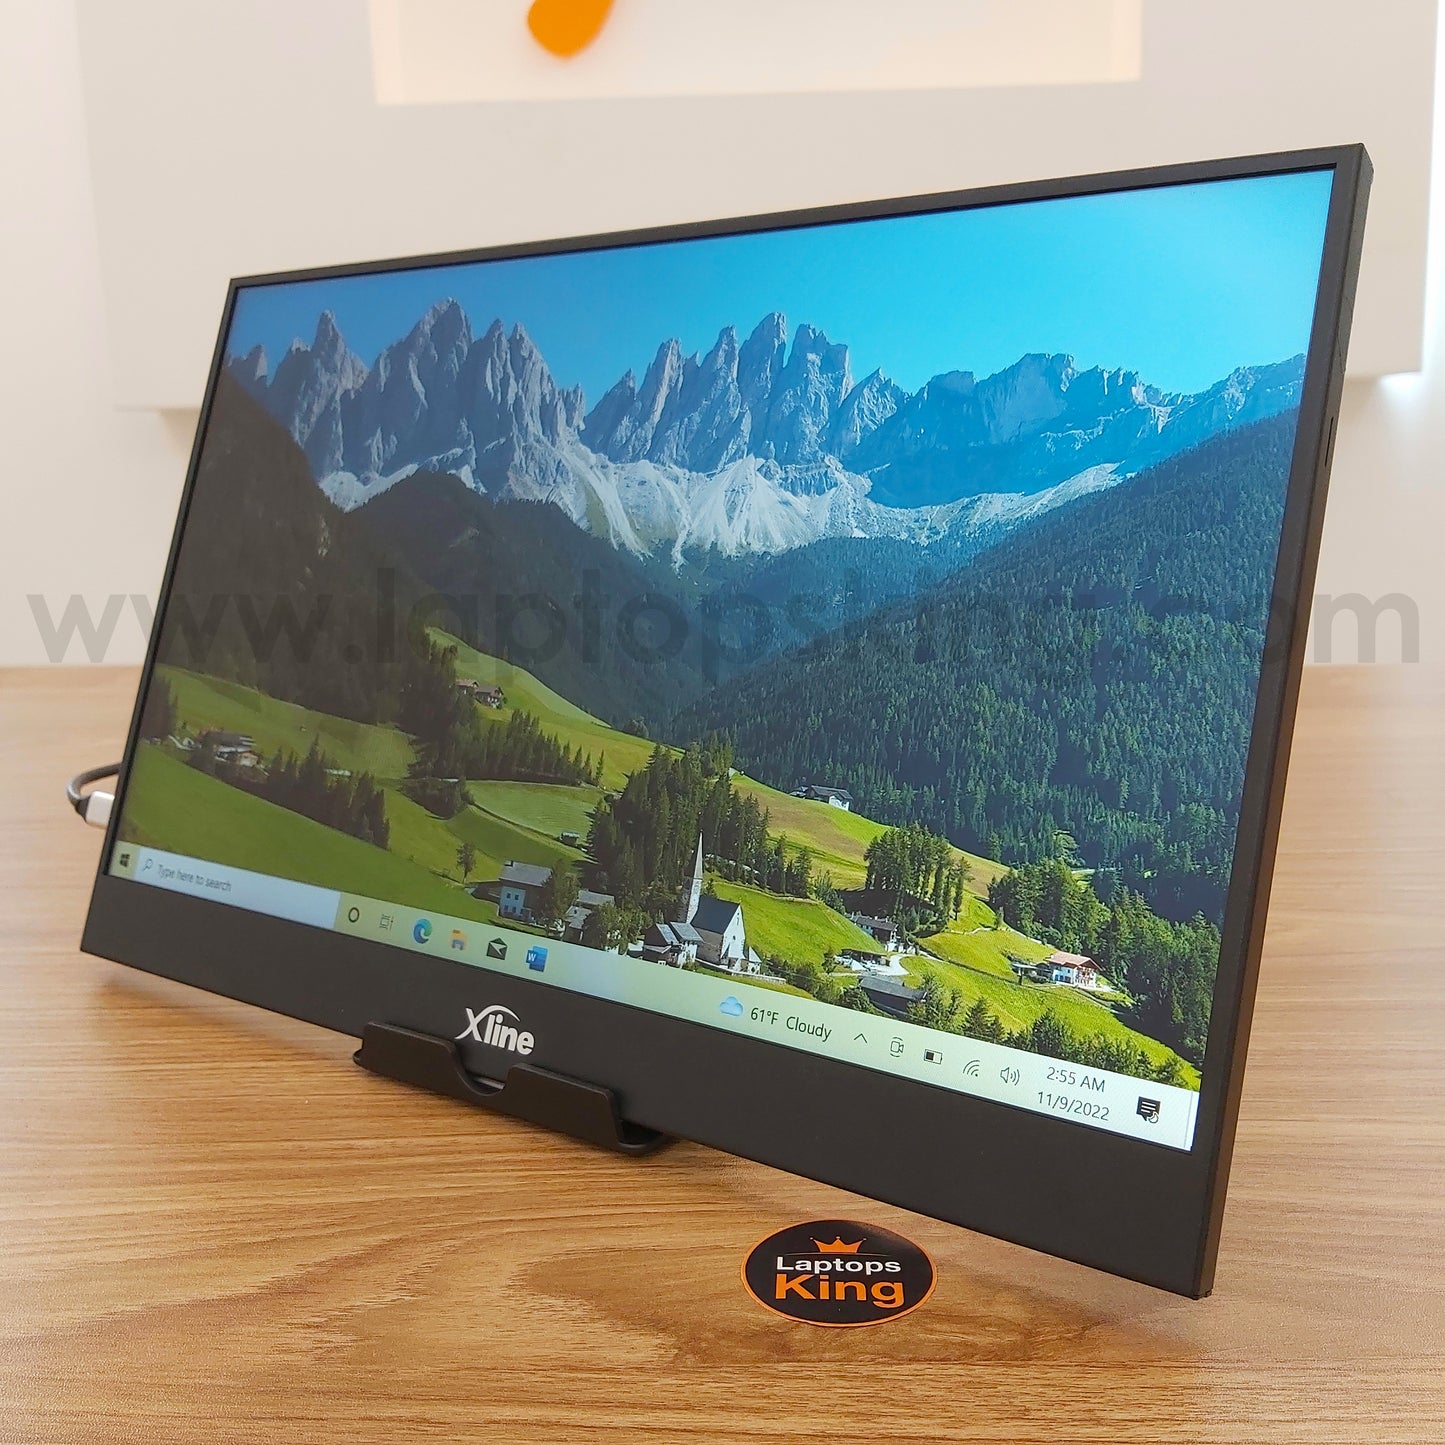 Xline Portable 15" Monitor Offers (New)